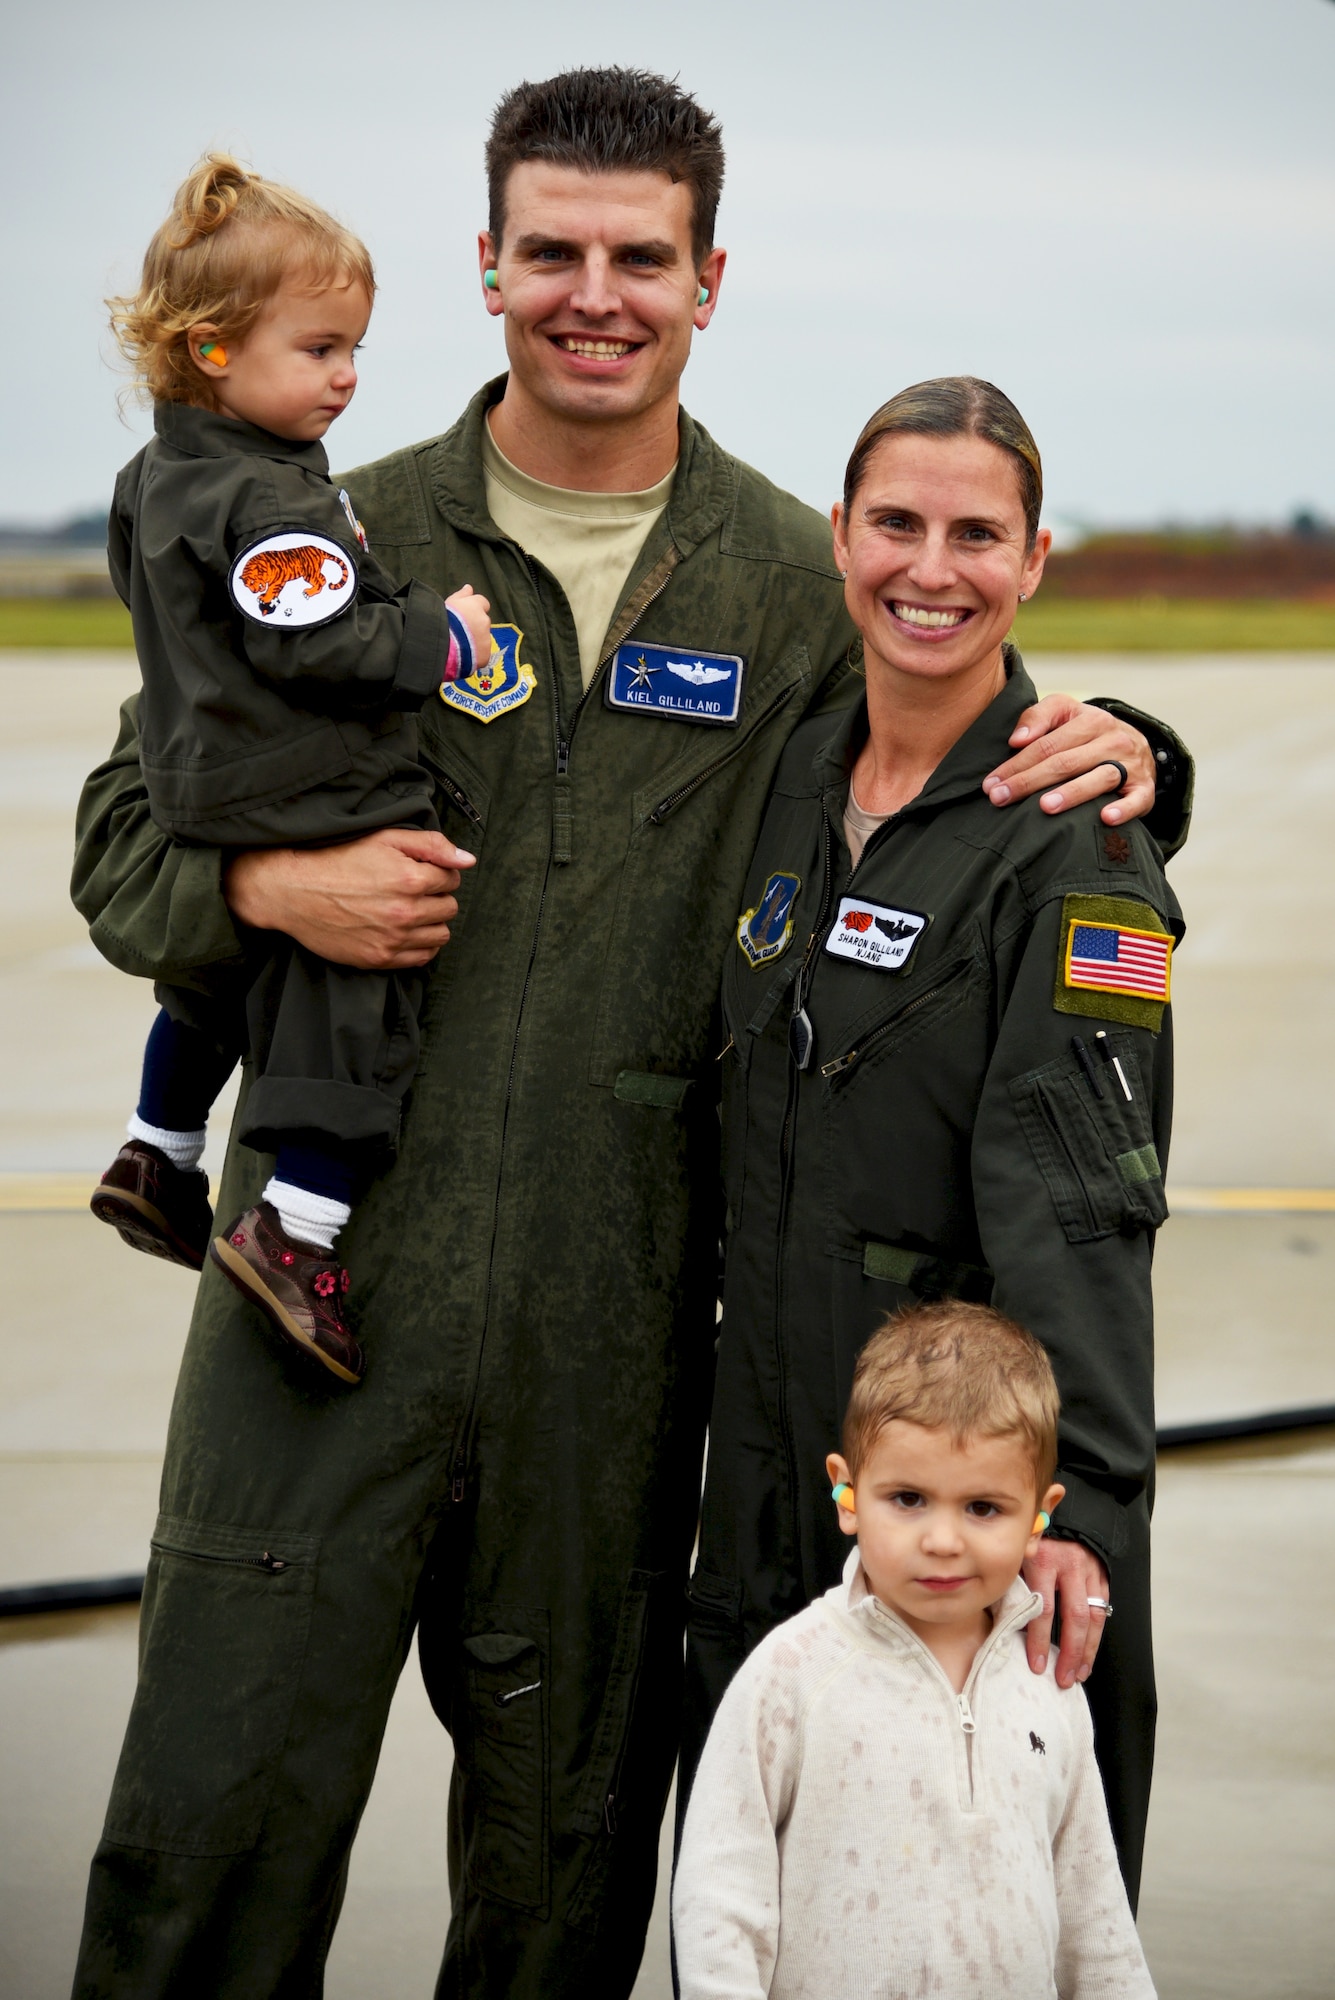 Maj. Sharon Gilliand, a KC-135 Stratotanker pilot with the 108th Wing, receives a celebratory spraying from her husband Maj. Kiel Gilliand, children Garrett and Lacey, fellow pilots and crew members following her final flight for the 108th Wing at Joint Base Mcguire-Dix-Lakehurst on Nov. 5, 2015. Gilliland, a pilot for 12 years with the New Jersey Air National Guard’s 108th Wing is ceremonially hosed down by fellow pilots, crewmembers, friends and family as she leaves piloting to others and takes a non-flying job with the 514th AMOS, Air Force Reserve so she can devote more time to her family. During her time in the 108th Wing, Gilliland deployed three times and has 60 combat sorties to her credit. (U.S. Air National Guard photo by Master Sgt. Carl Clegg/Released)